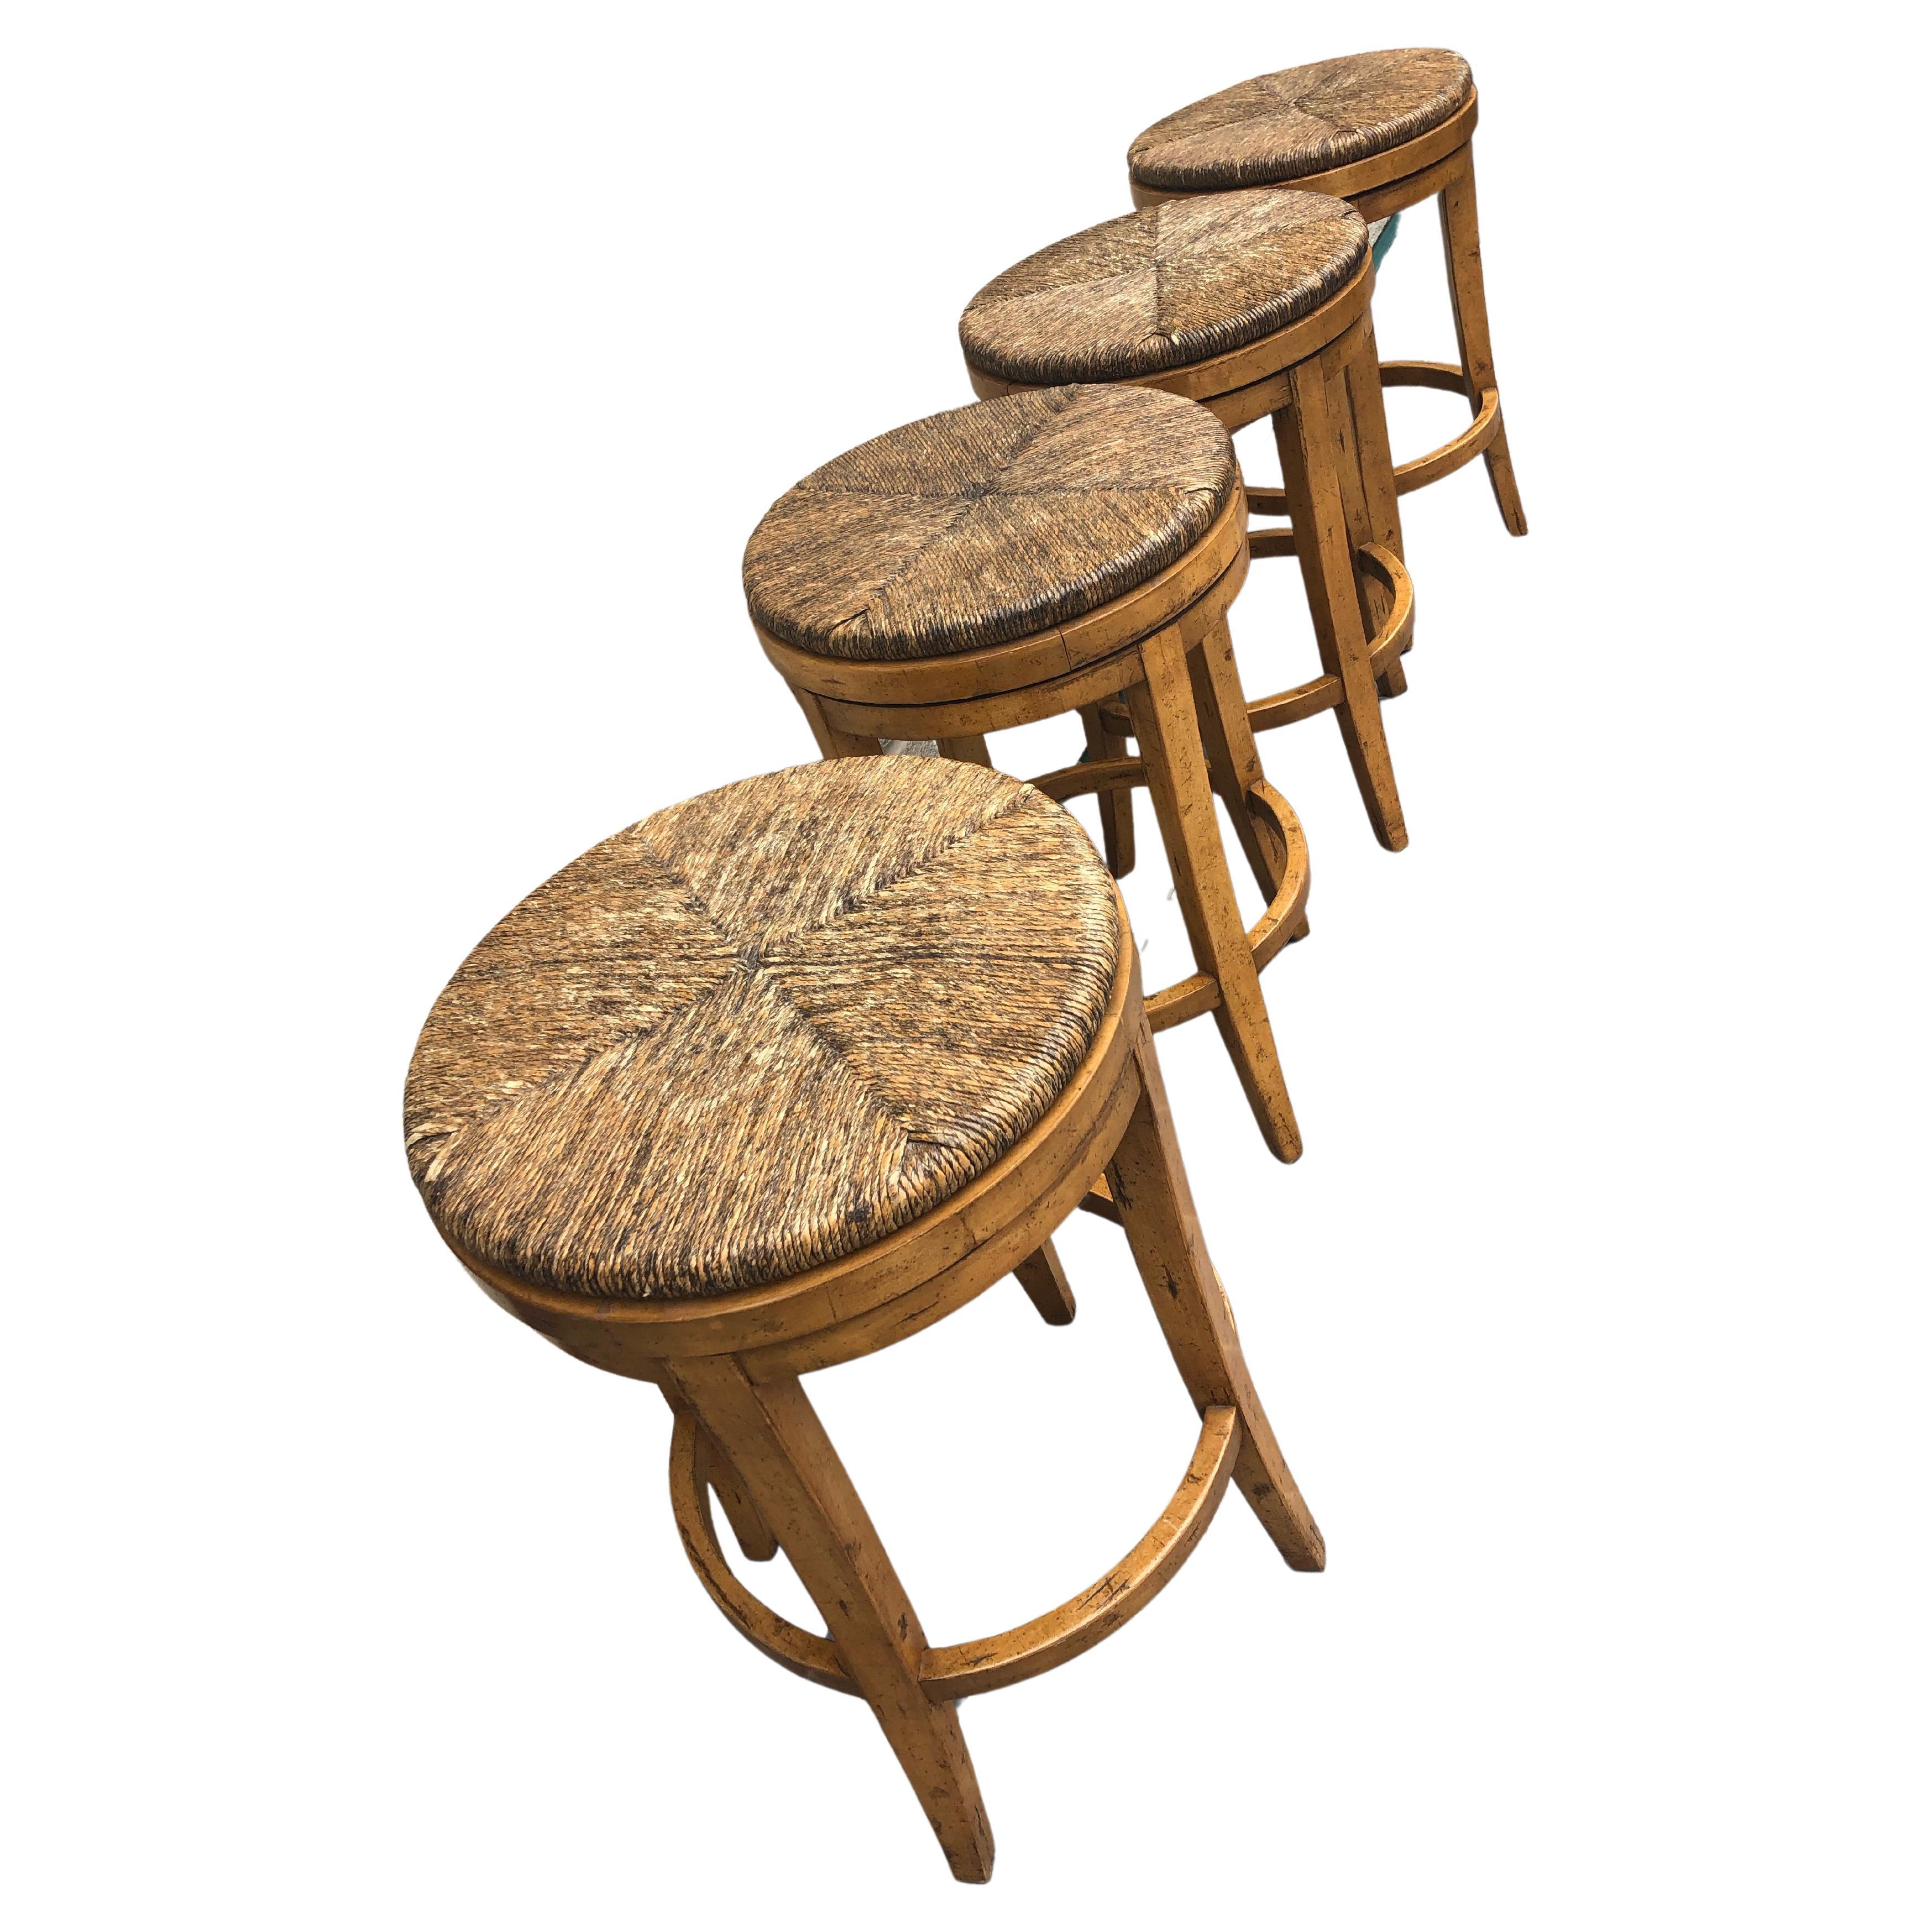 Impressive set of comfortable sturdy Hyde barstools by Guy Chaddock. Handsome wood bases with rush seats that swivel.